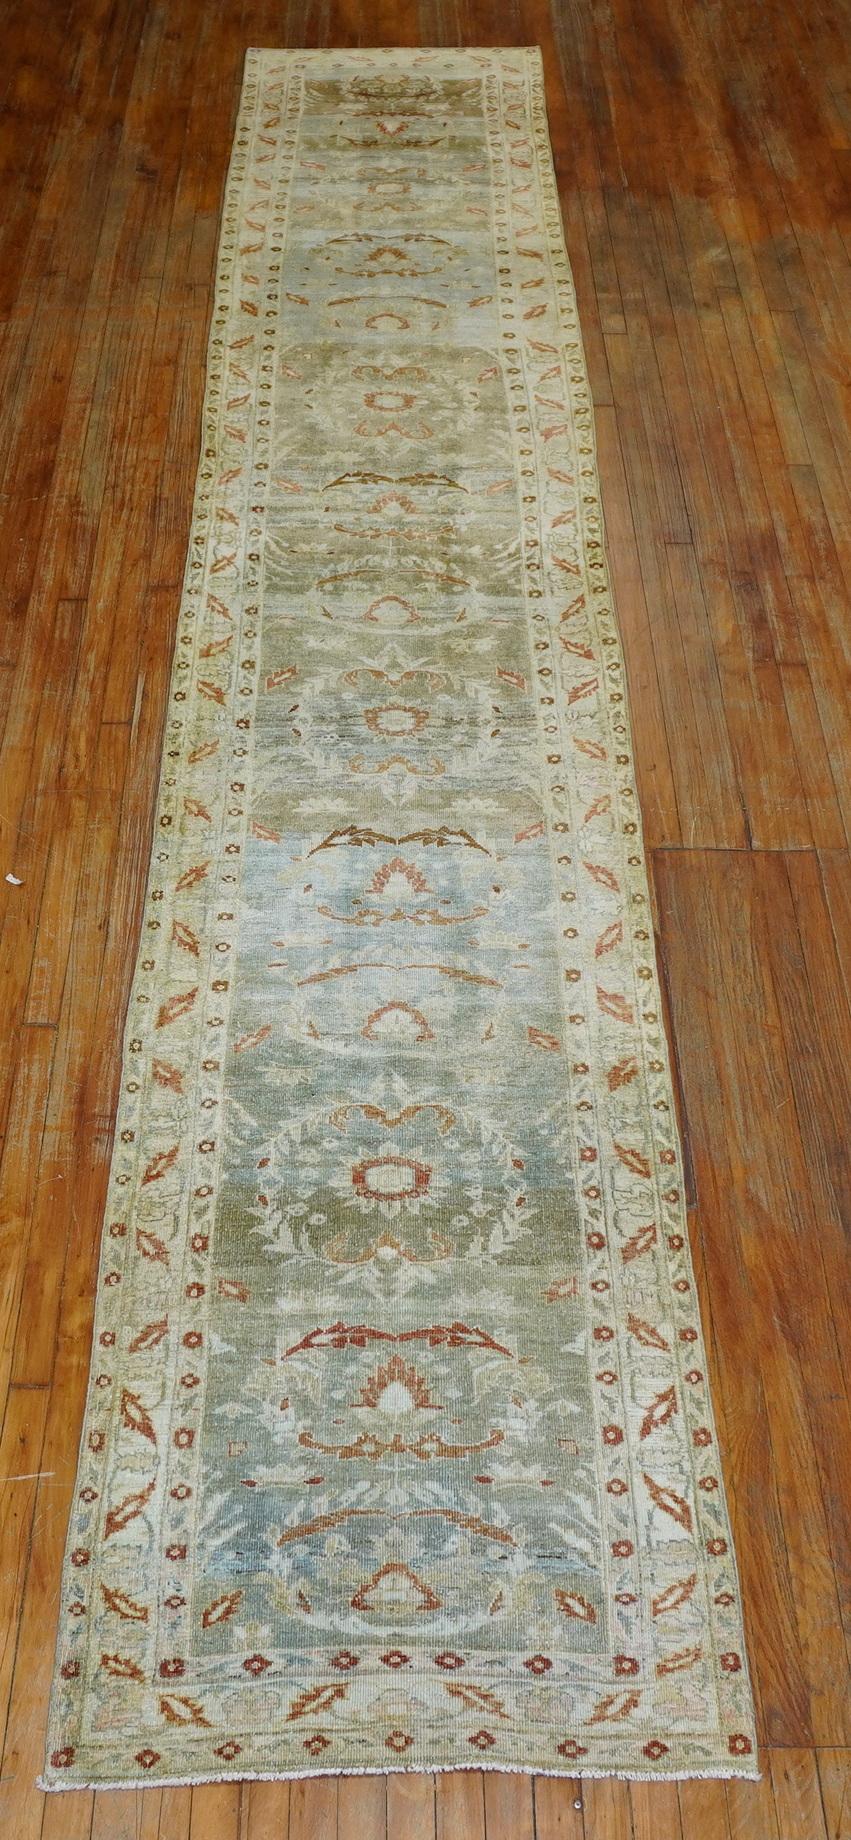 Predominant green and terracotta Persian Sarouk Runner from the early 20th century.

Measures: 2'10